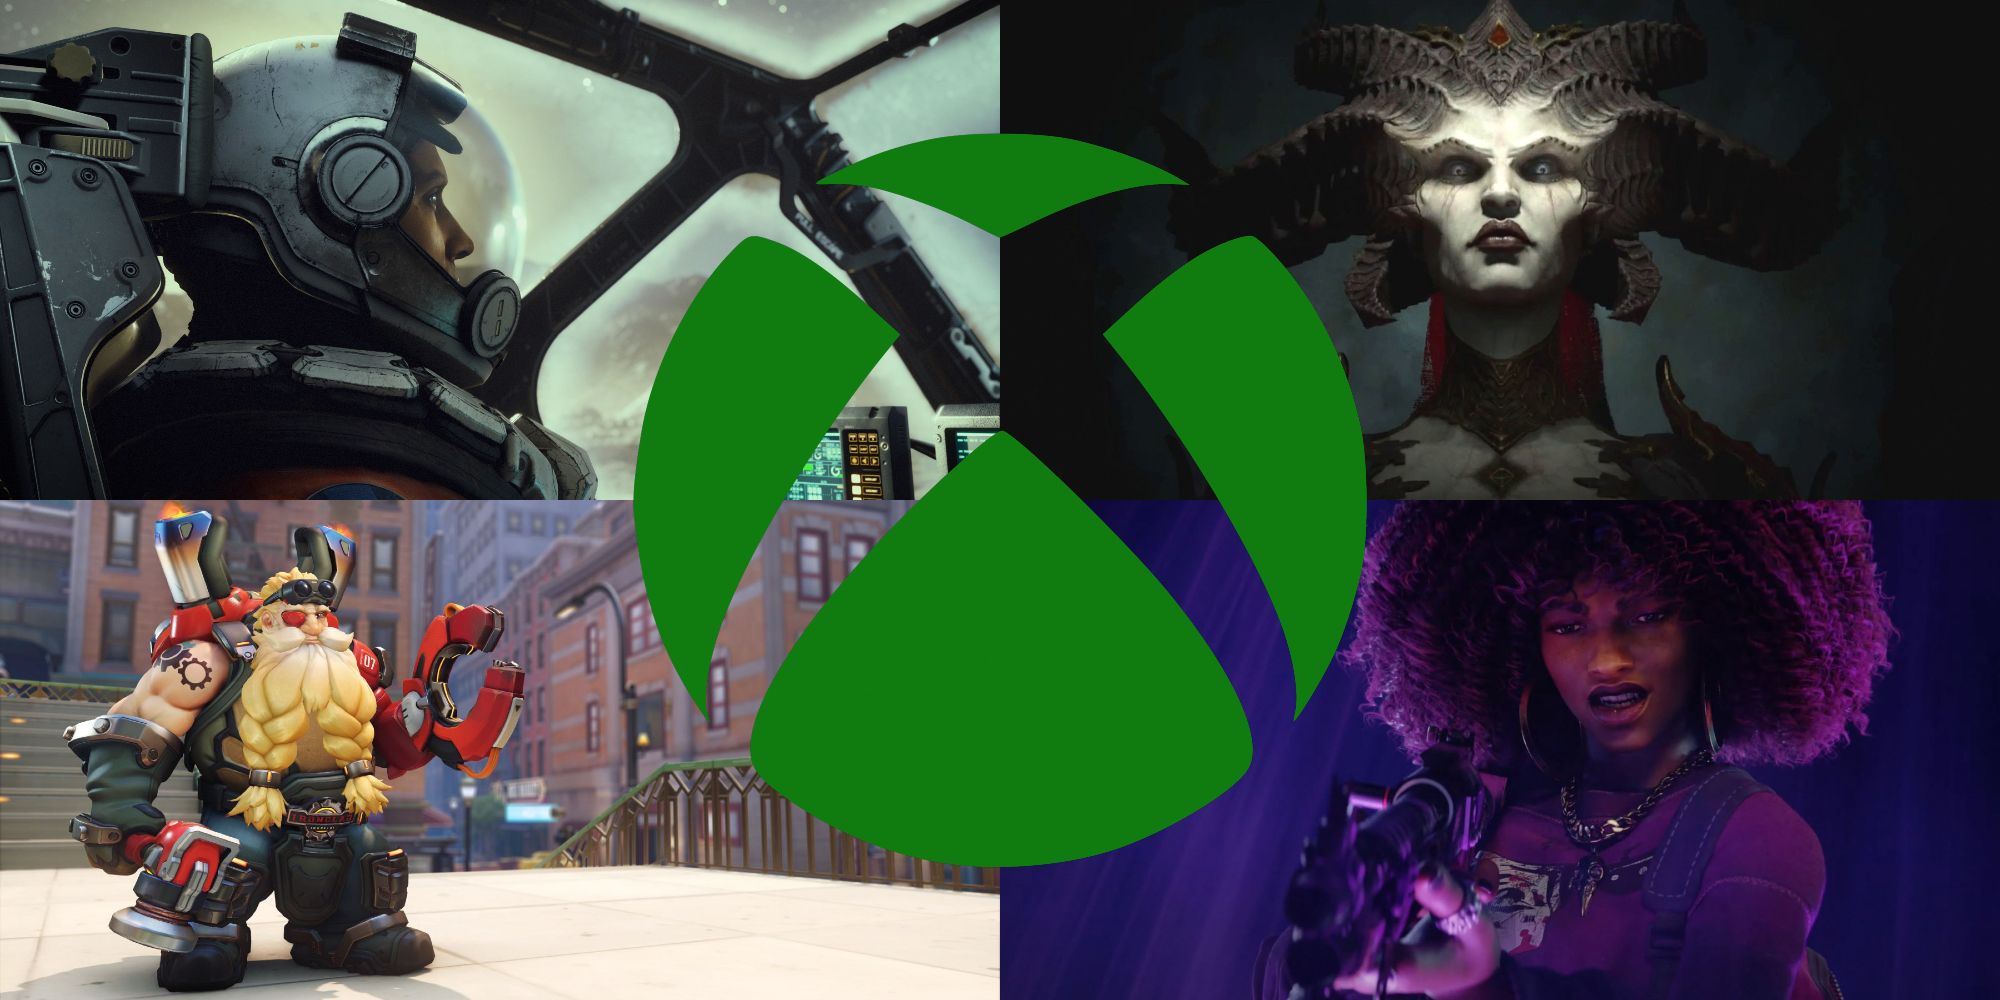 Microsoft Studios becomes Xbox Game Studios, reflecting gaming brand's  evolution beyond the console – GeekWire